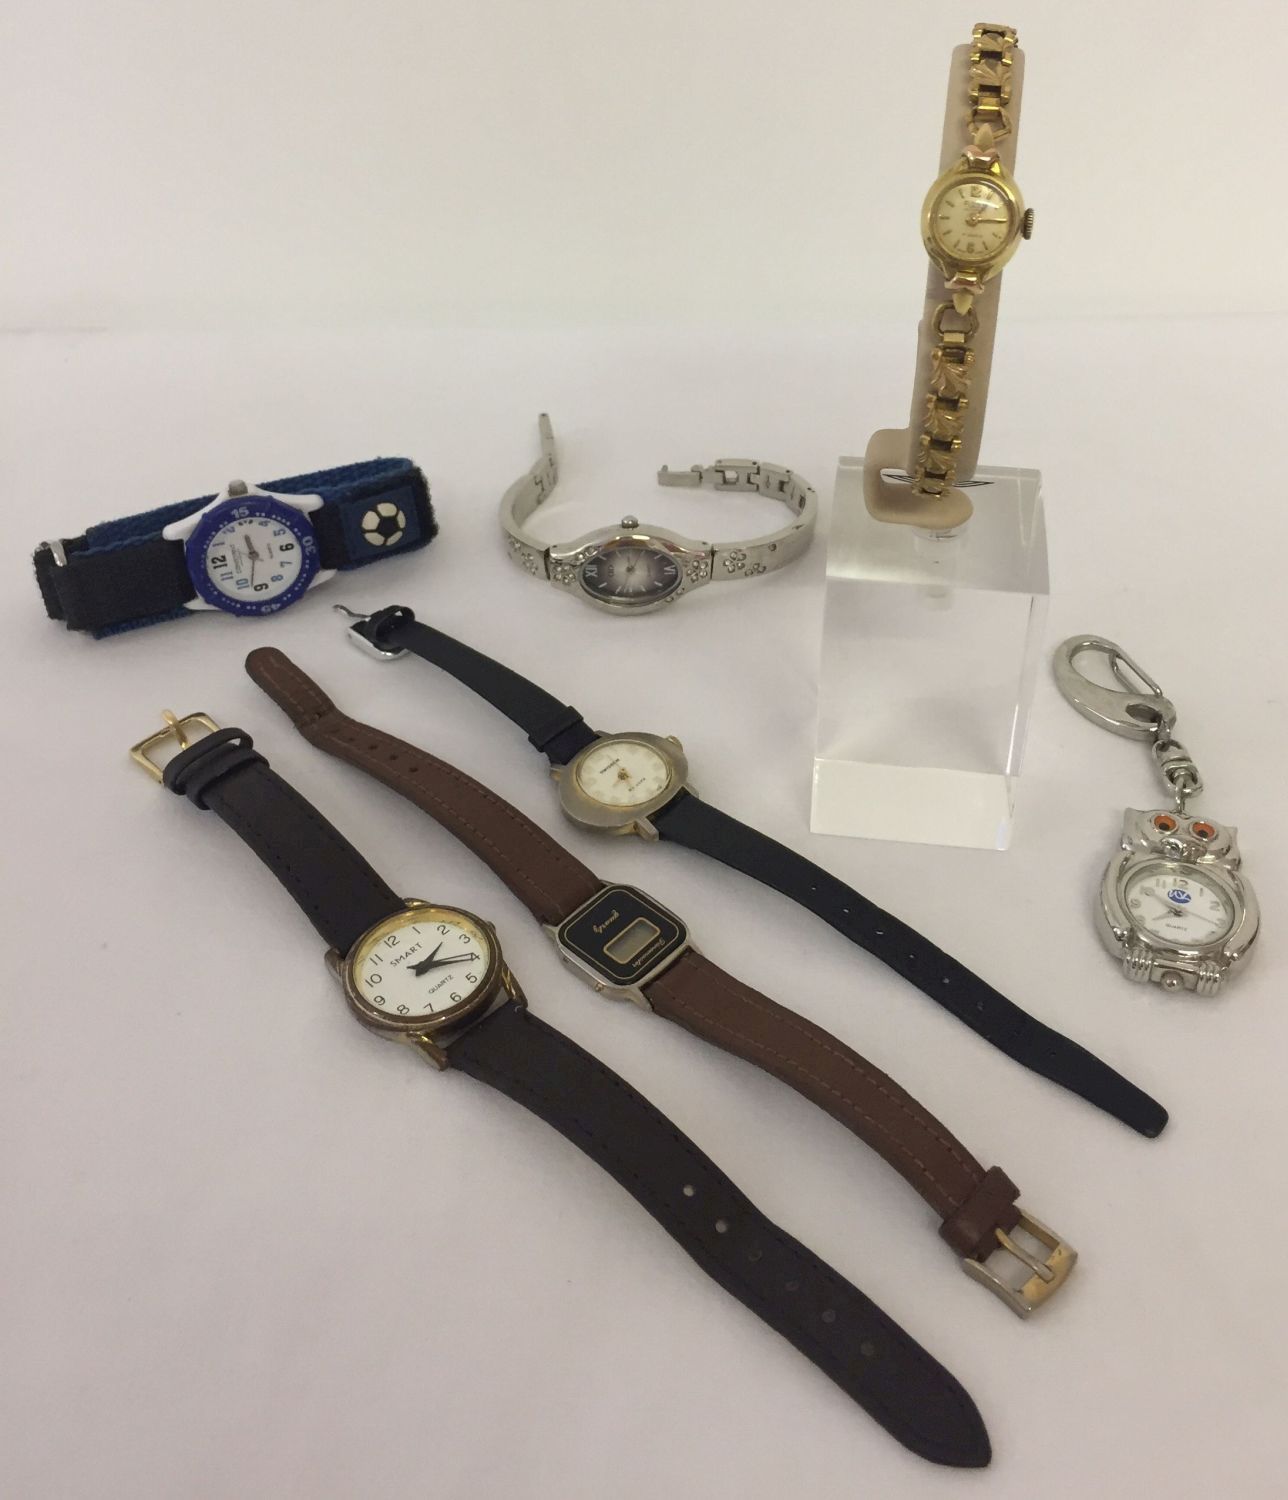 5 vintage quartz watches together with 2 mechanical watches, all in working order.